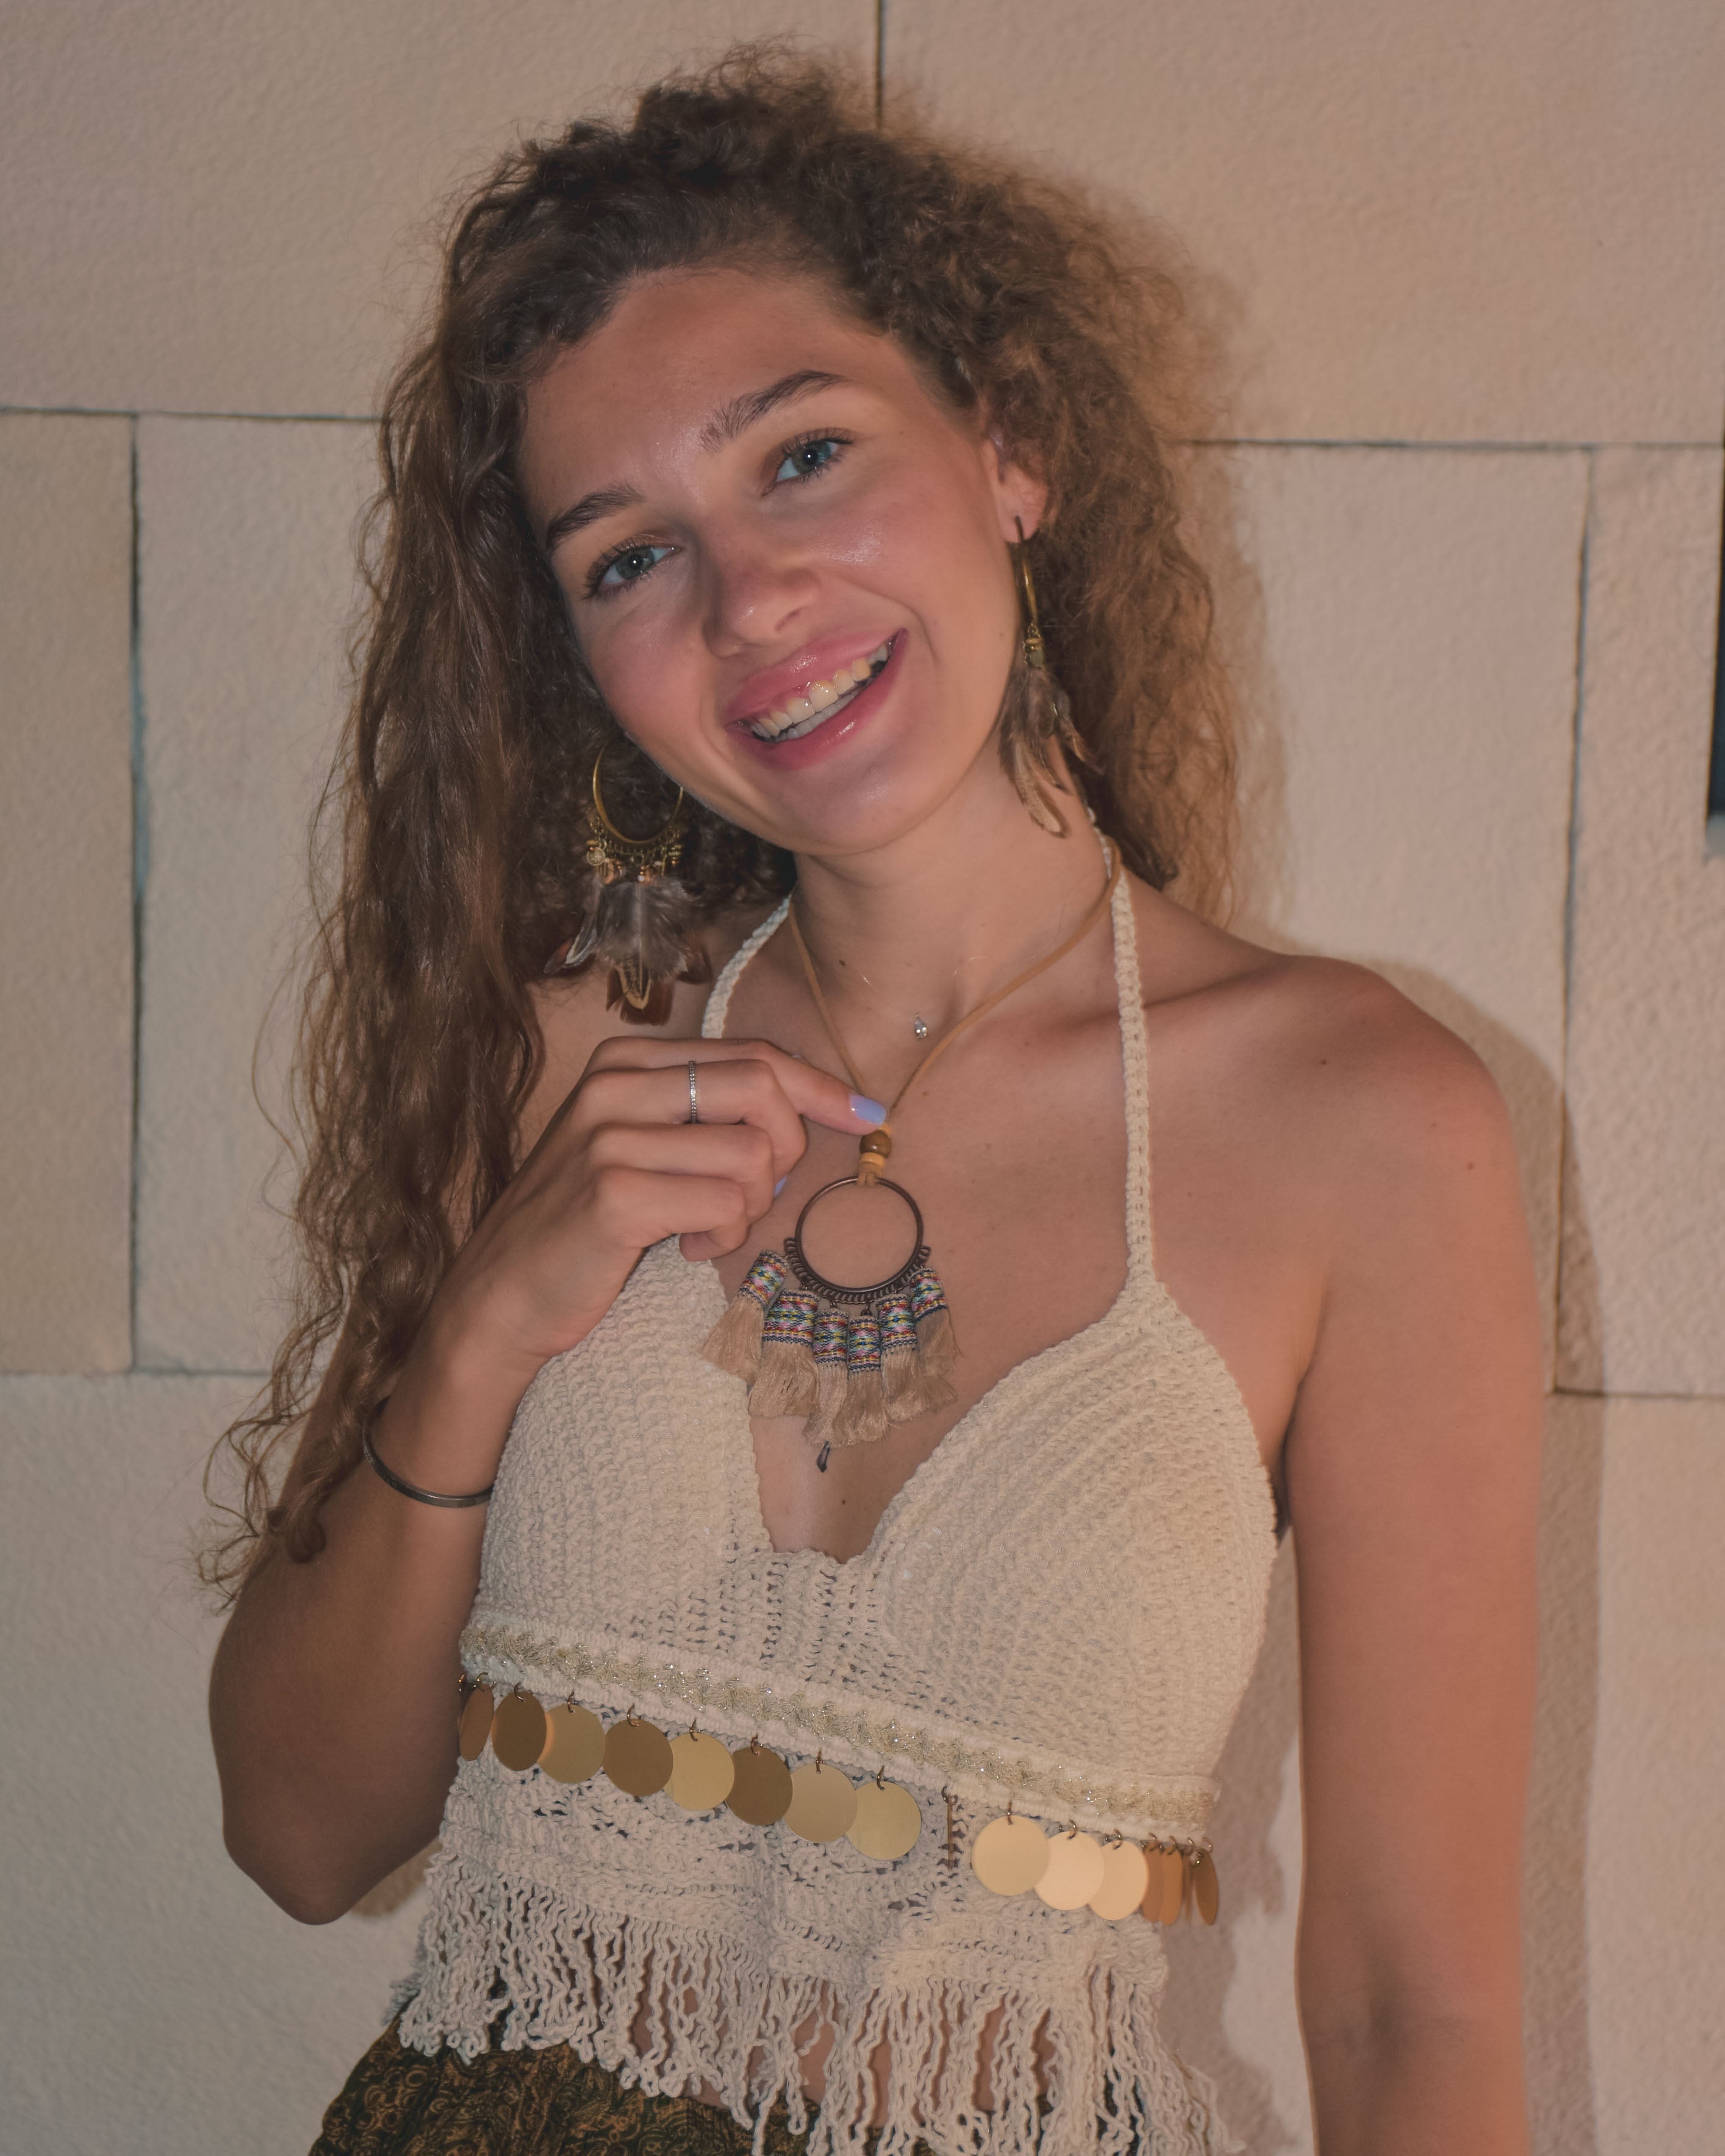 CABO NECKLACE Elepanta Necklaces - Buy Today Elephant Pants Jewelry And Bohemian Clothes Handmade In Thailand Help To Save The Elephants FairTrade And Vegan